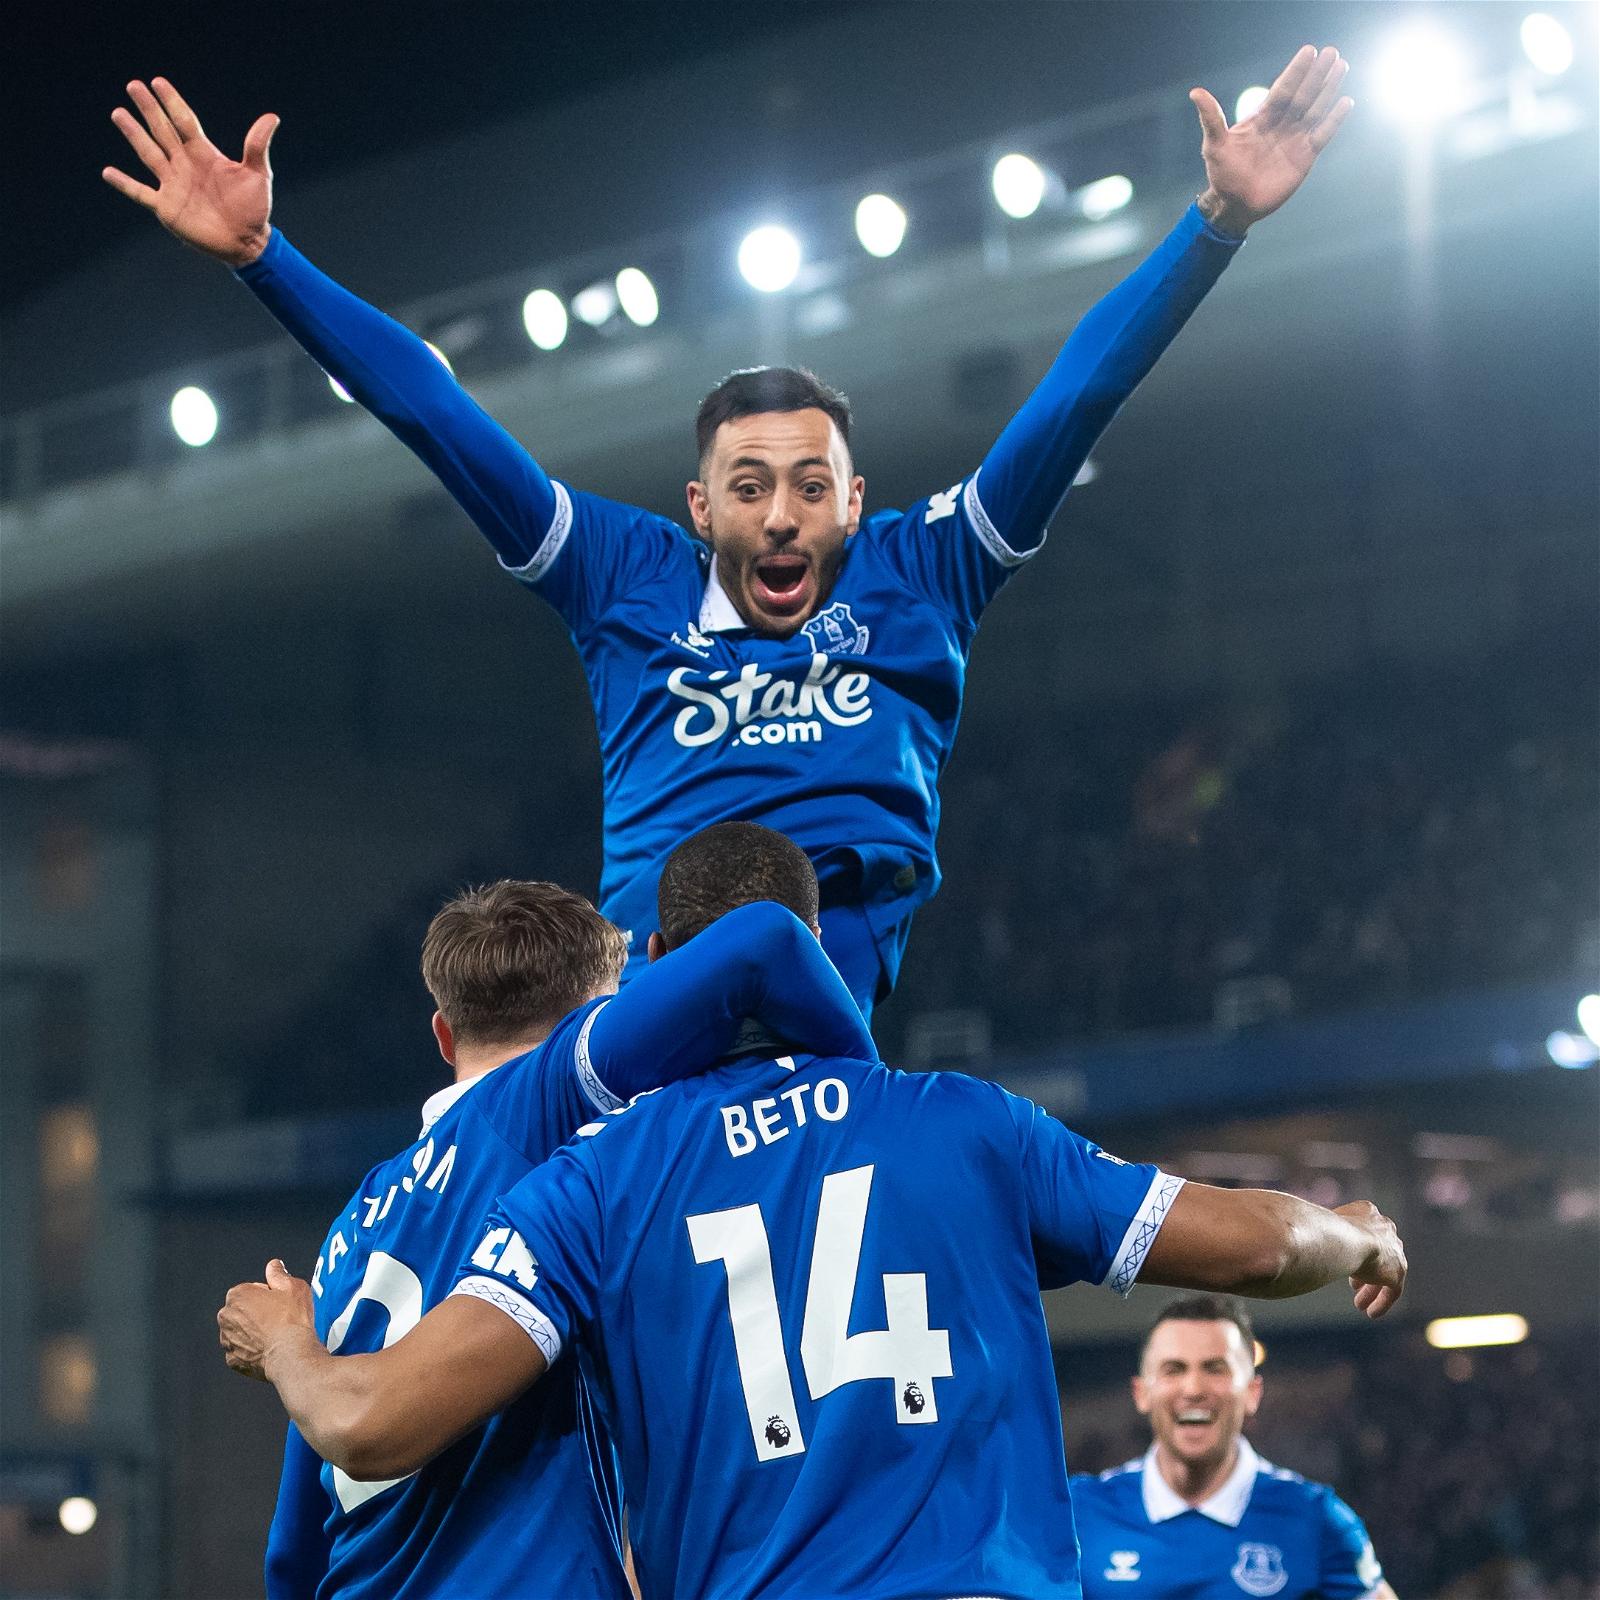 Everton stun Newcastle 3-0 to move out of Premier League relegation zone